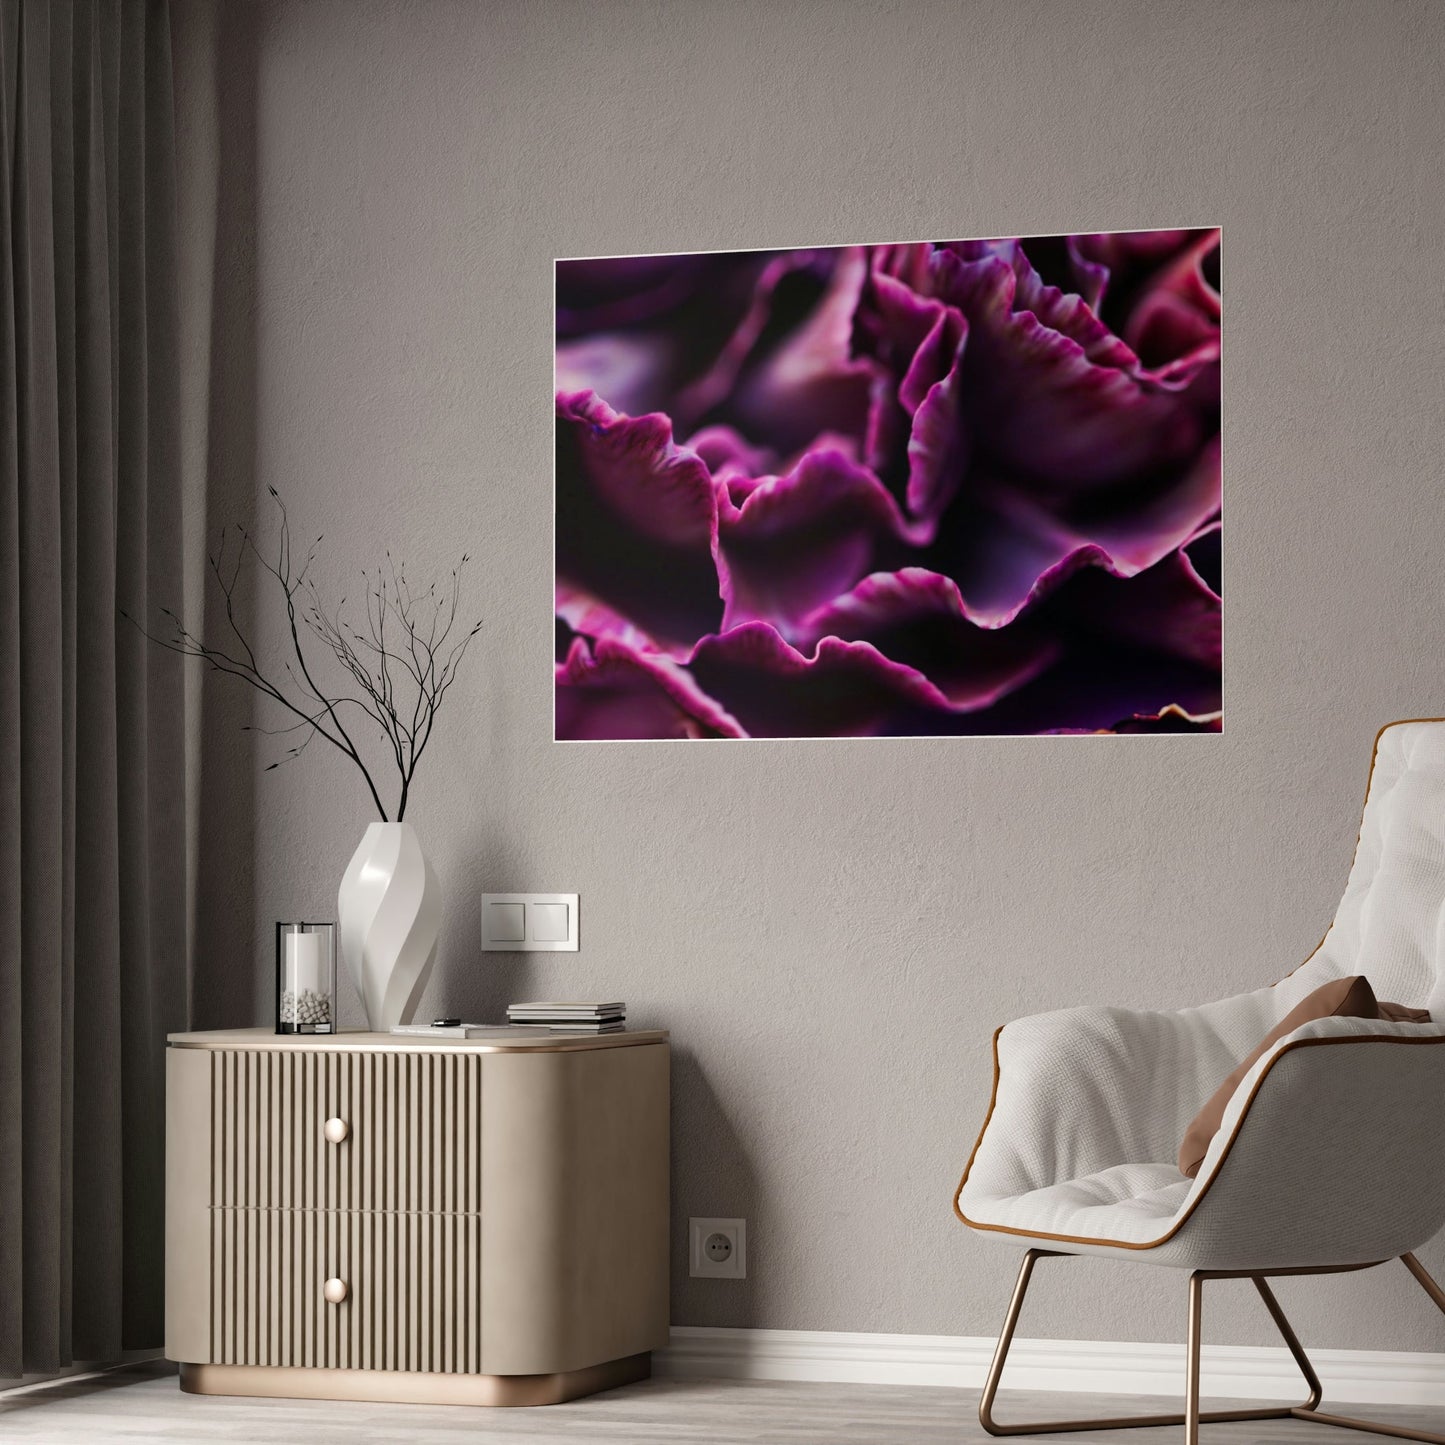 Colorful Petals: Framed Canvas and Wall Art of Carnations for Your Walls